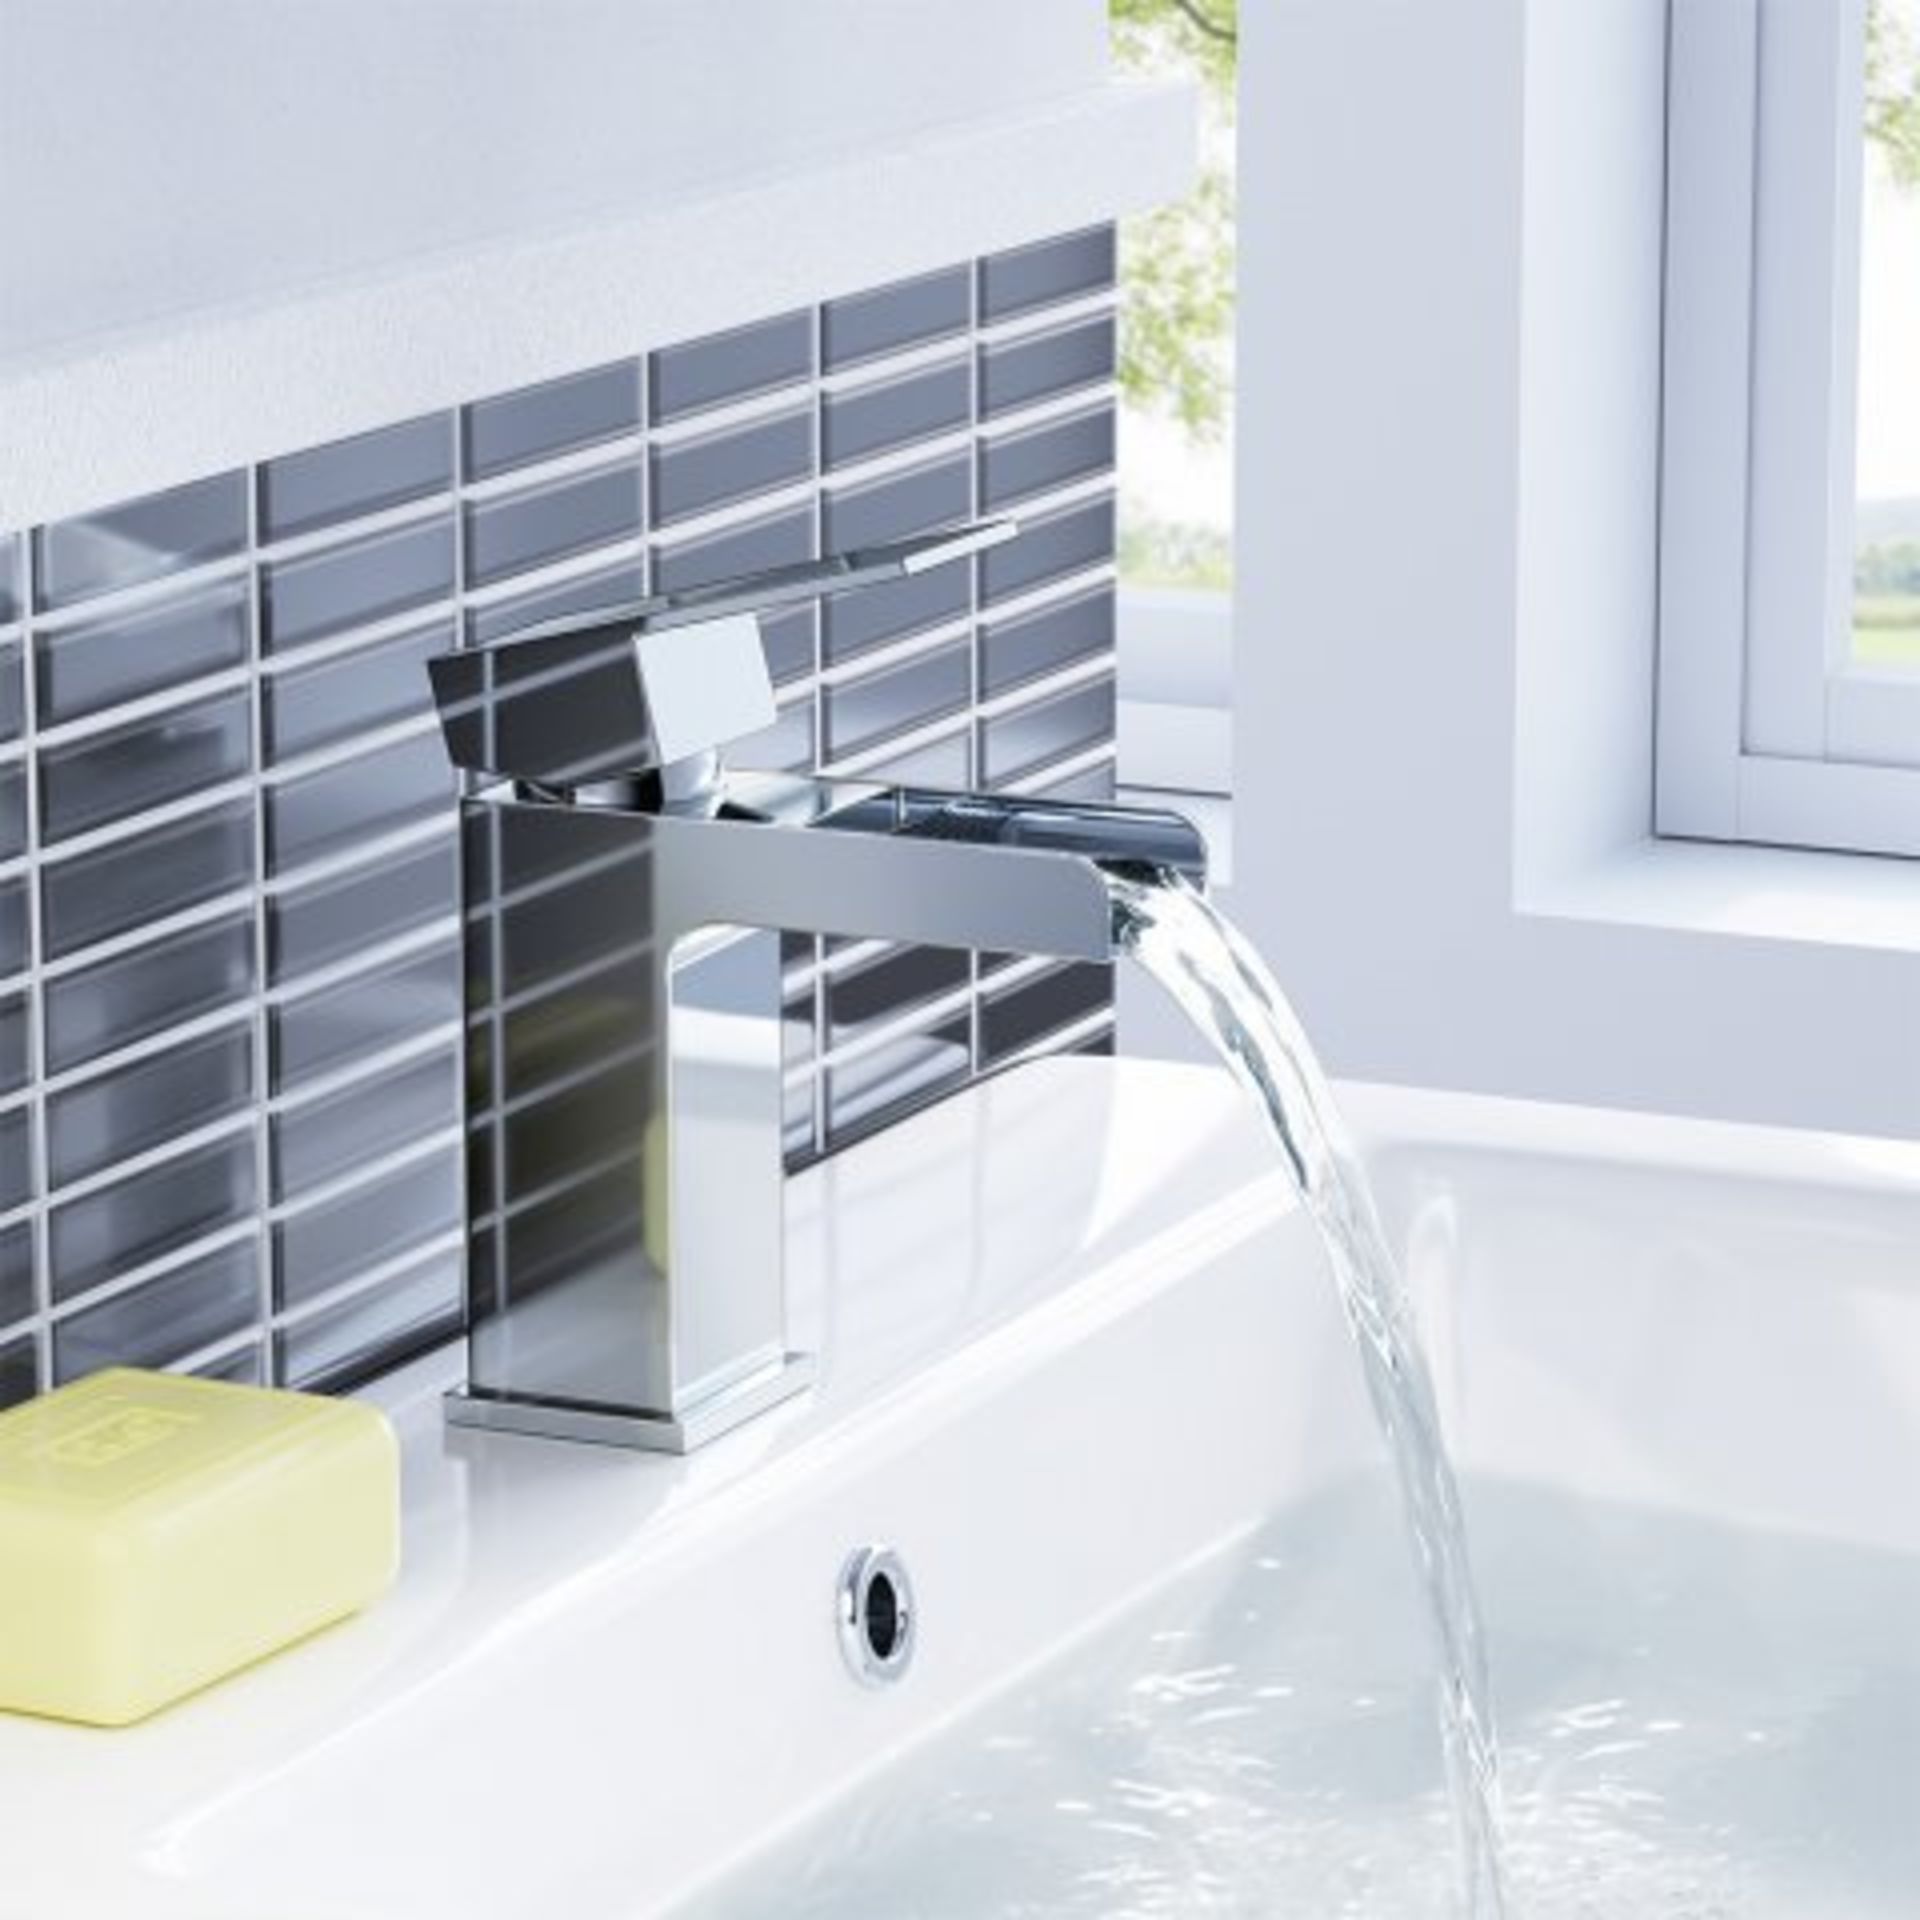 (I64) Niagra II Basin Mixer Tap Waterfall Feature Our range of waterfall taps add a contemporary - Image 3 of 3